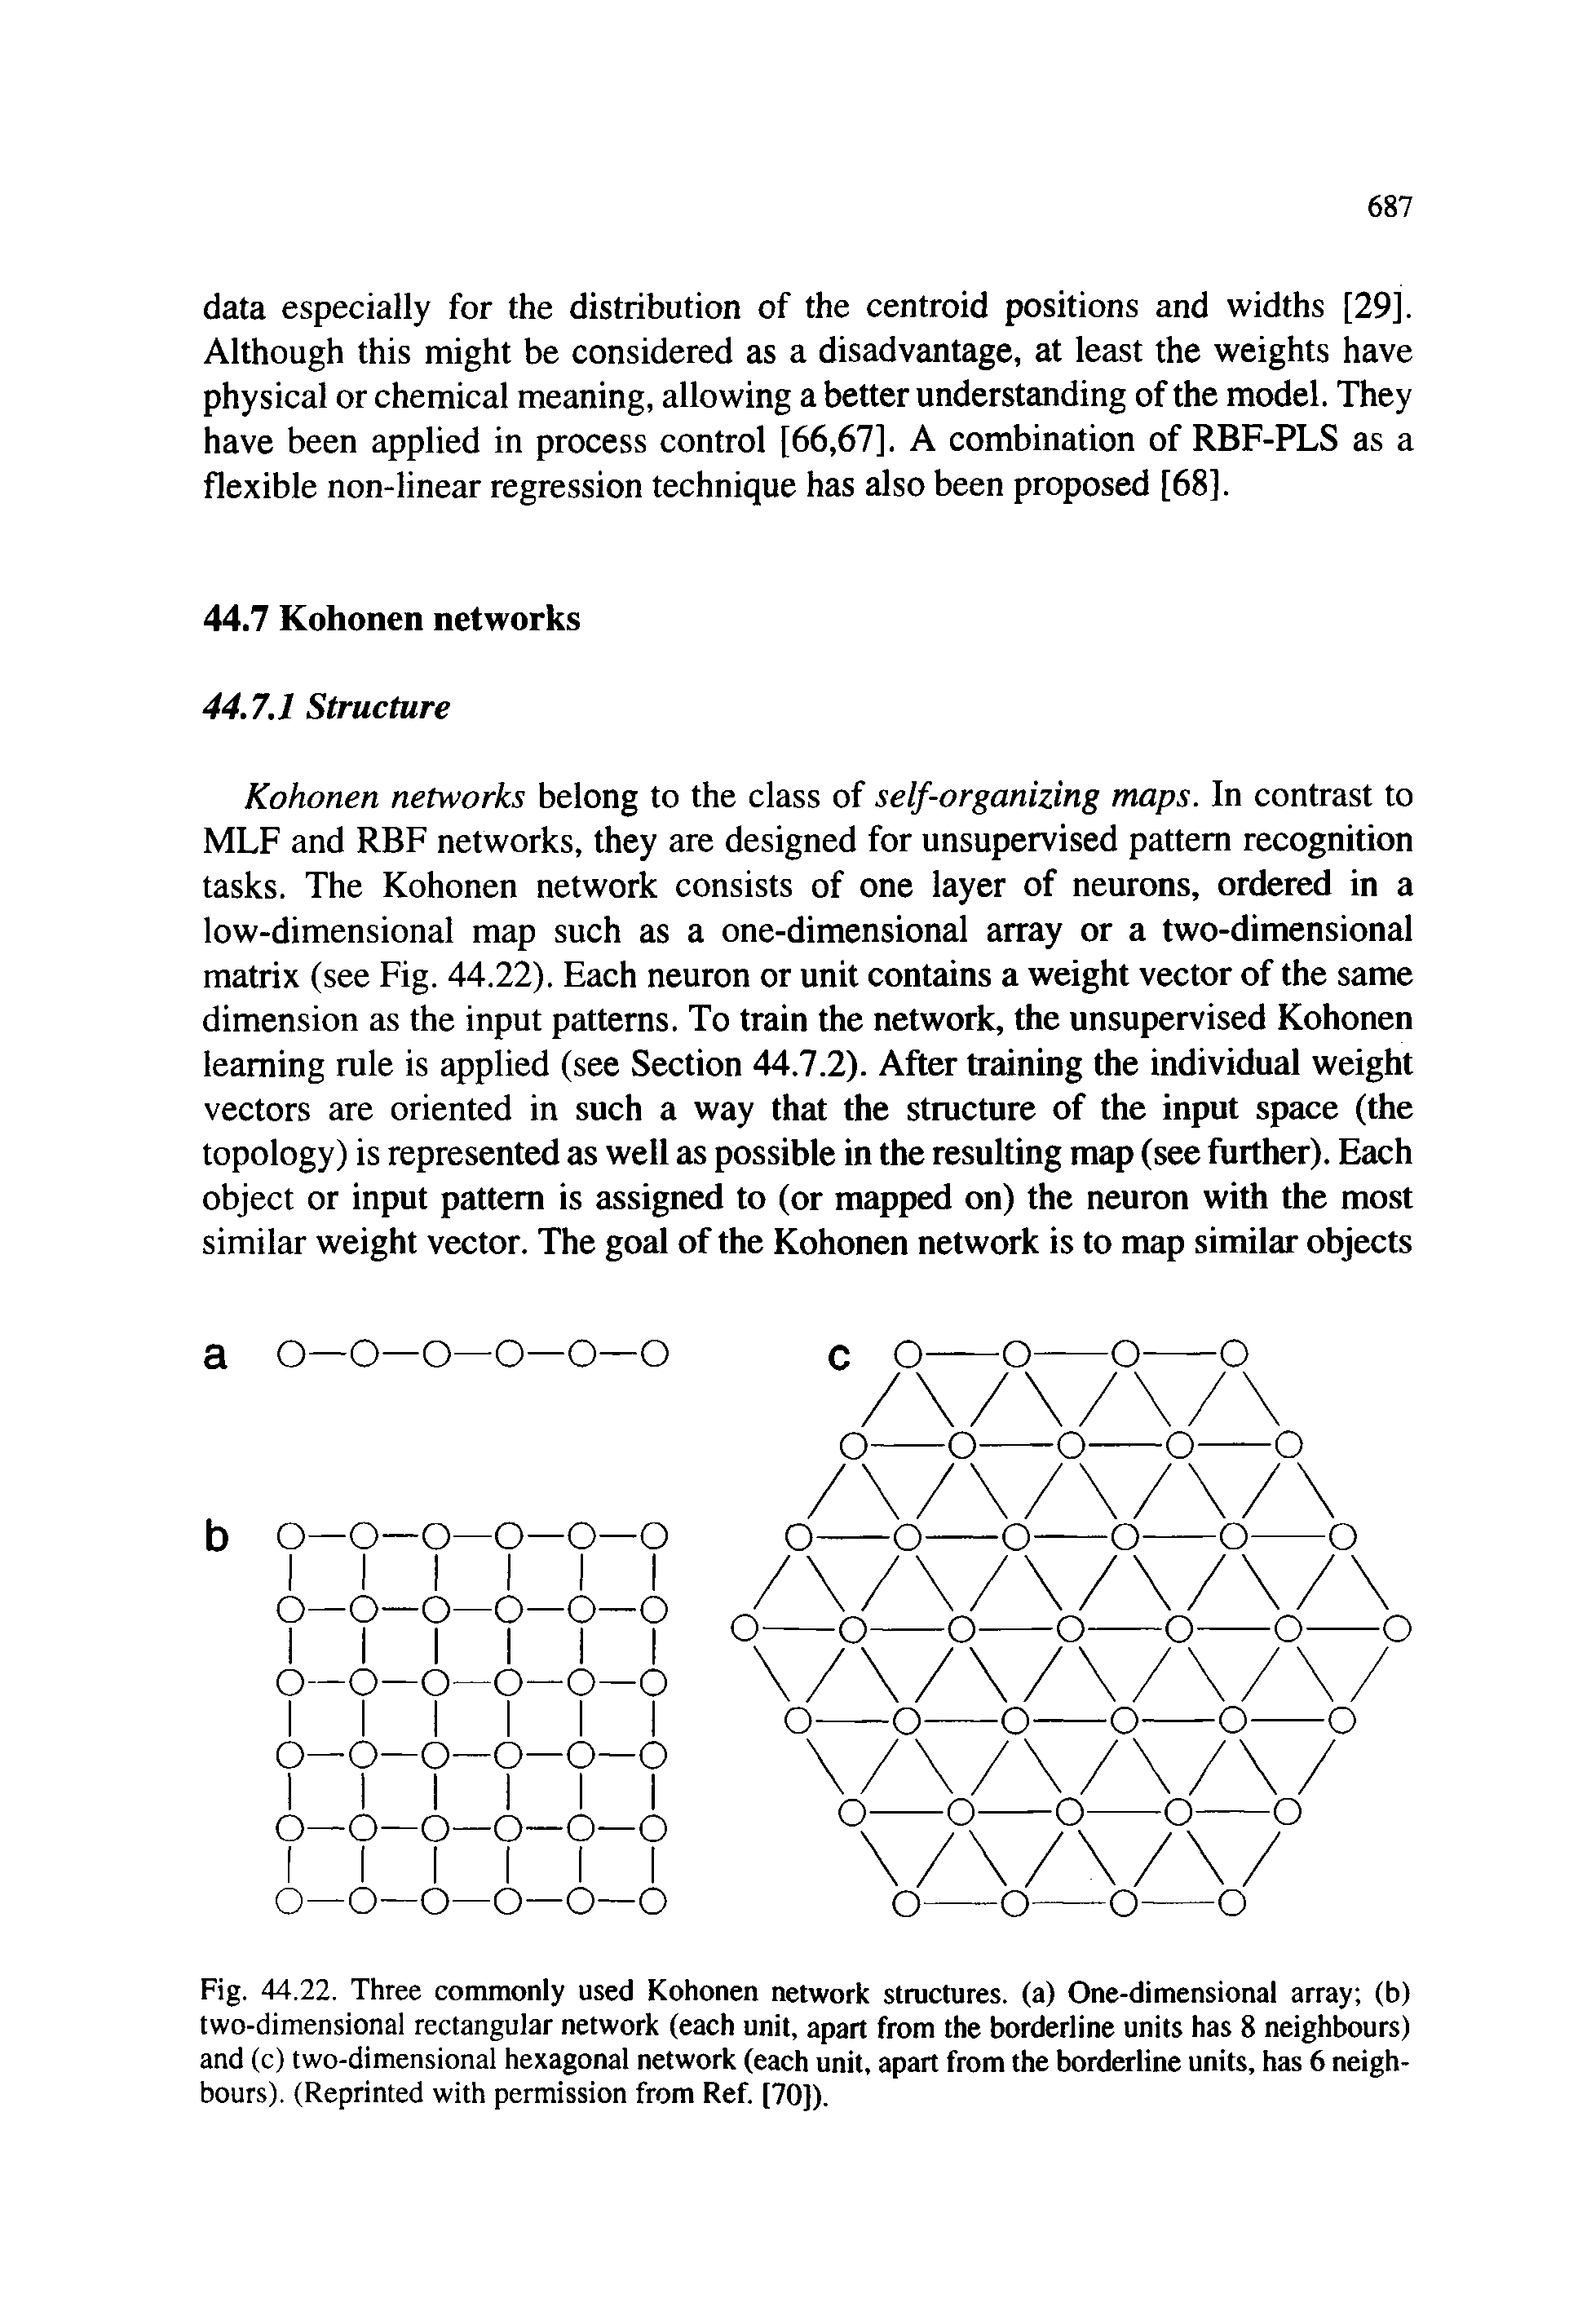 Fig. 44.22. Three commonly used Kohonen network structures, (a) One-dimensional array (b) two-dimensional rectangular network (each unit, apart from the borderline units has 8 neighbours) and (c) two-dimensional hexagonal network (each unit, apart from the borderline units, has 6 neighbours). (Reprinted with permission from Ref. [70]).